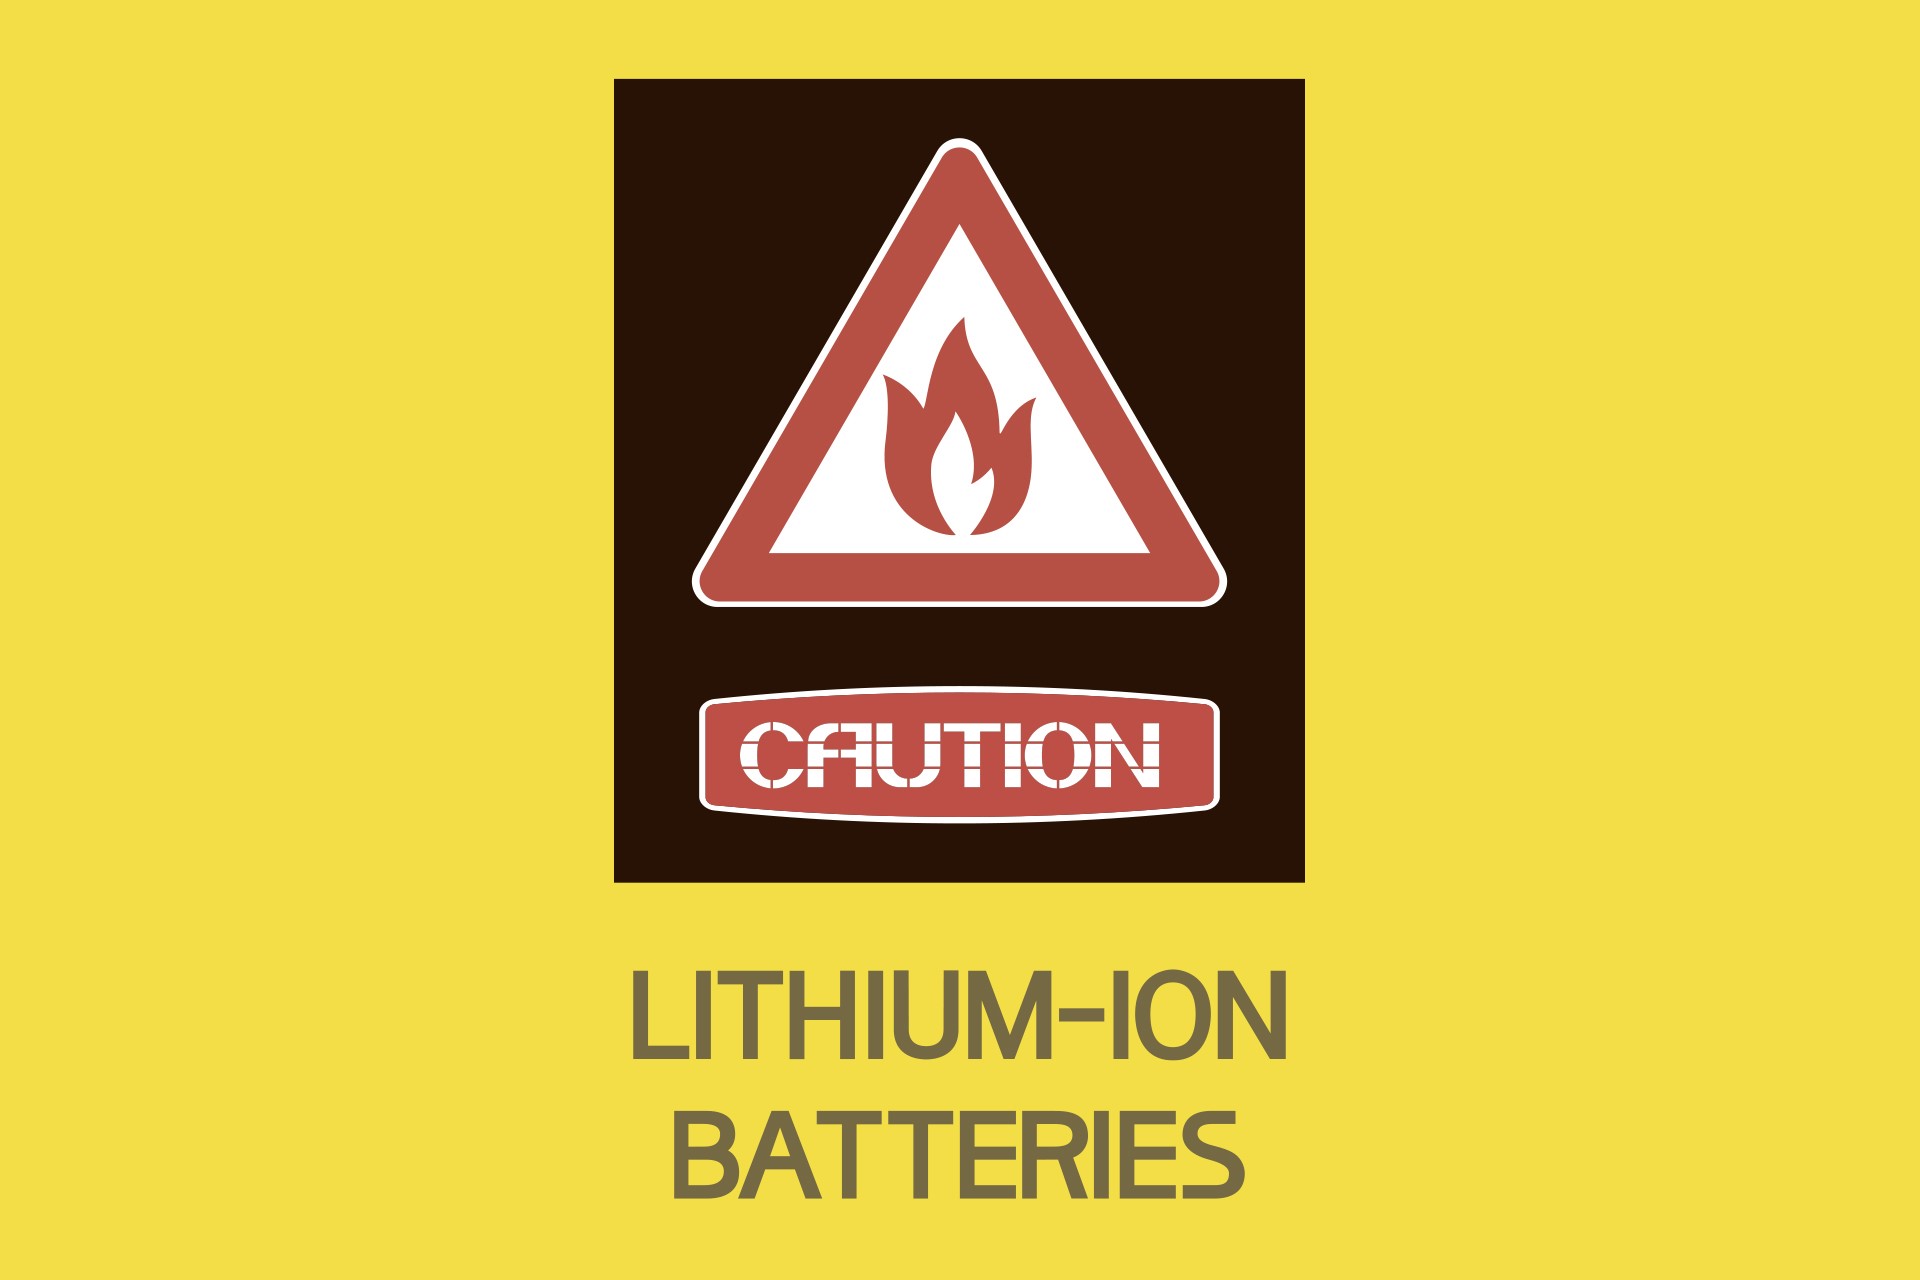 Confused about ATEX compliant lithium-ion forklift batteries